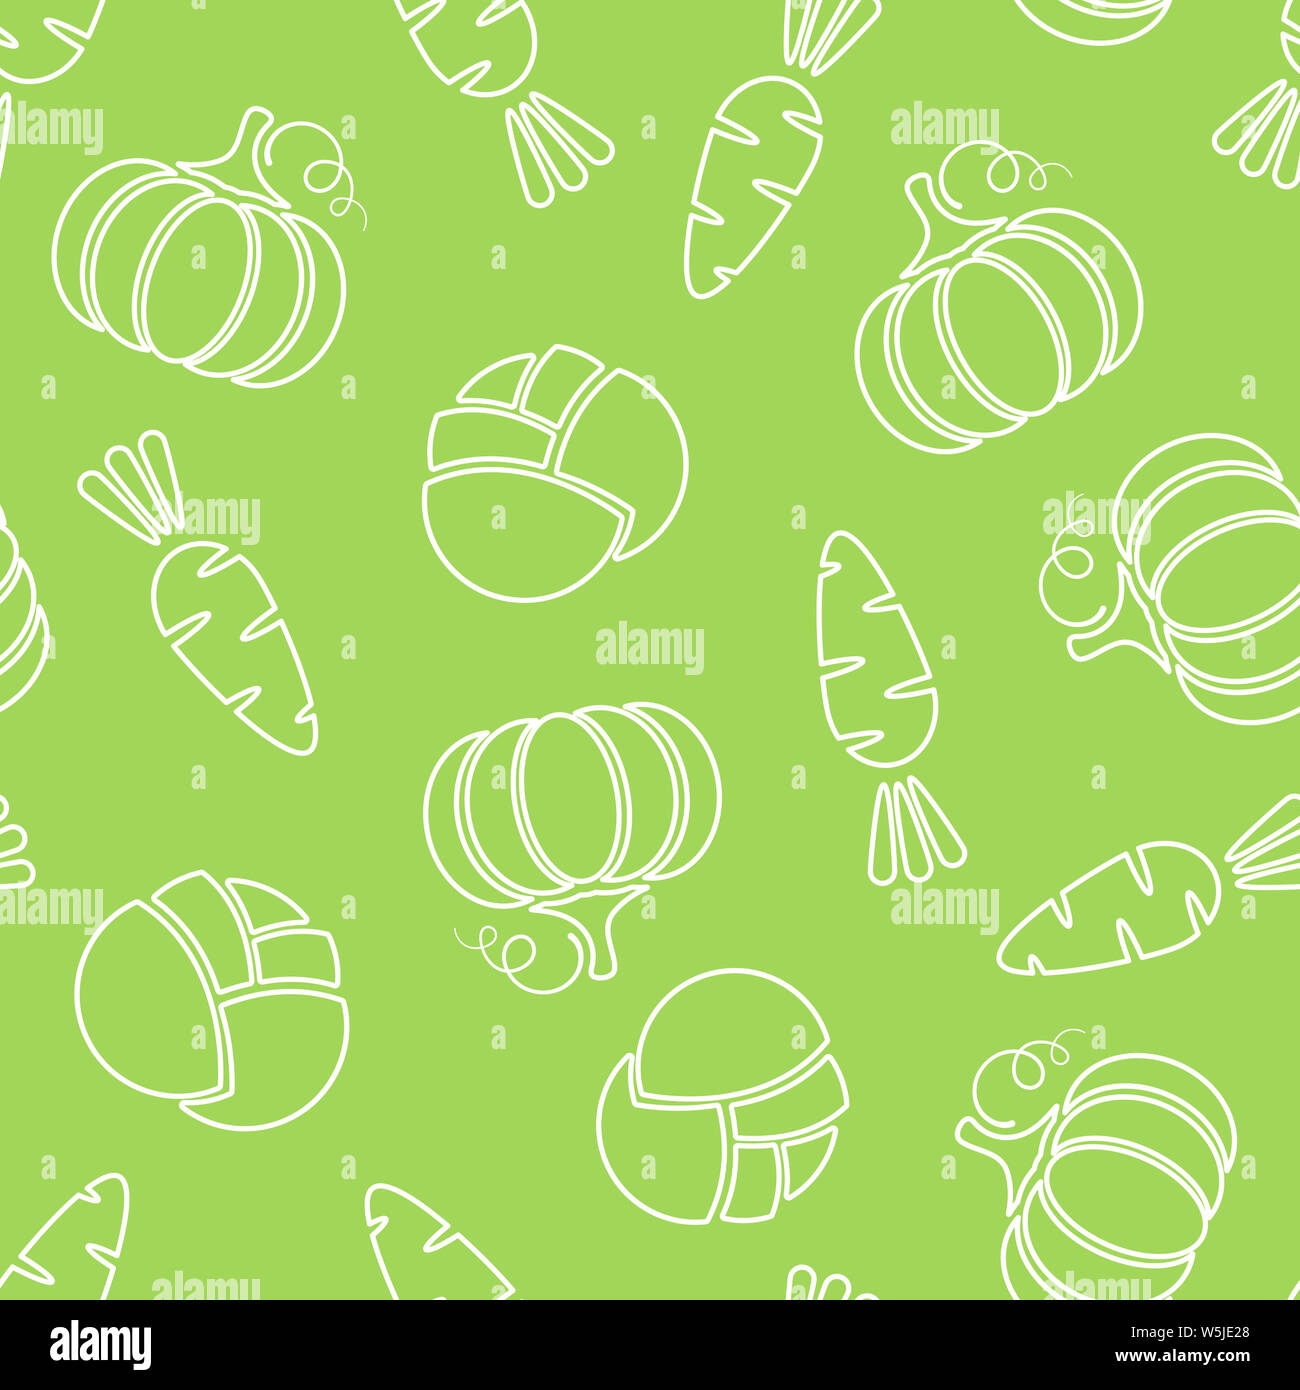 Seamless line vegetable pattern flat illustration. Modern seamless texture pattern design with vegetable silhouette in green and white colors for healthy diet decor or vintage wallpaper Stock Photo